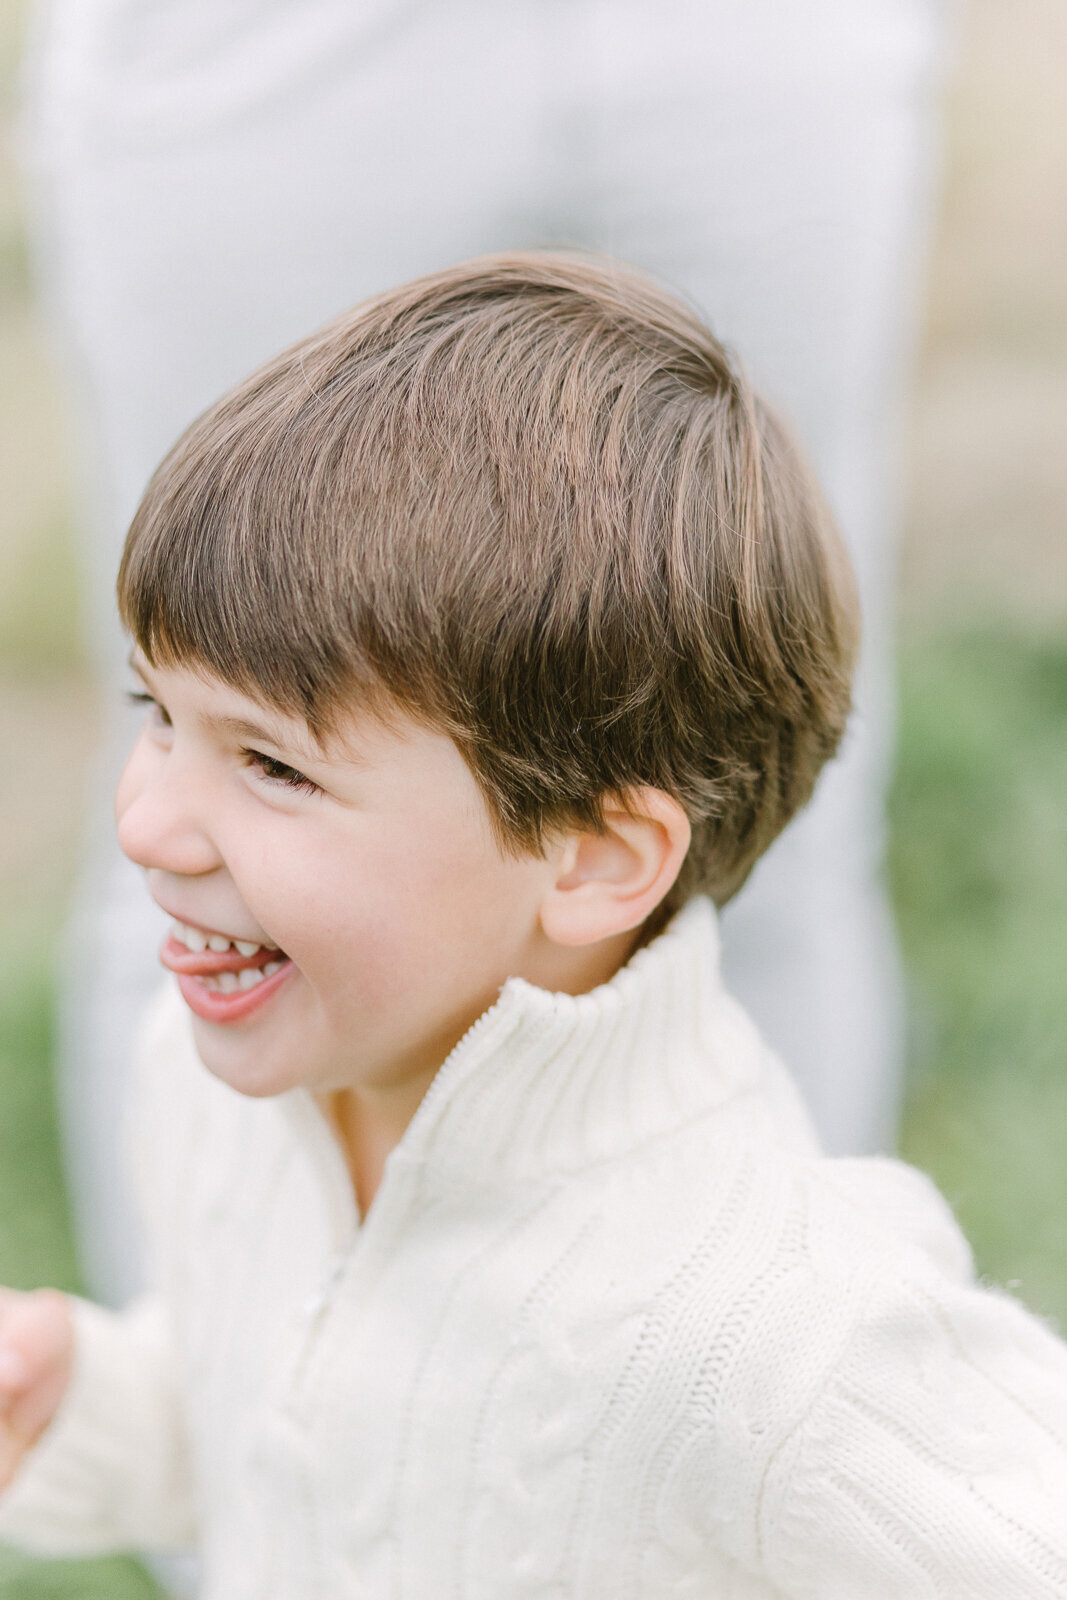 A young boy smiling and laughing with his tongue slightly sticking out